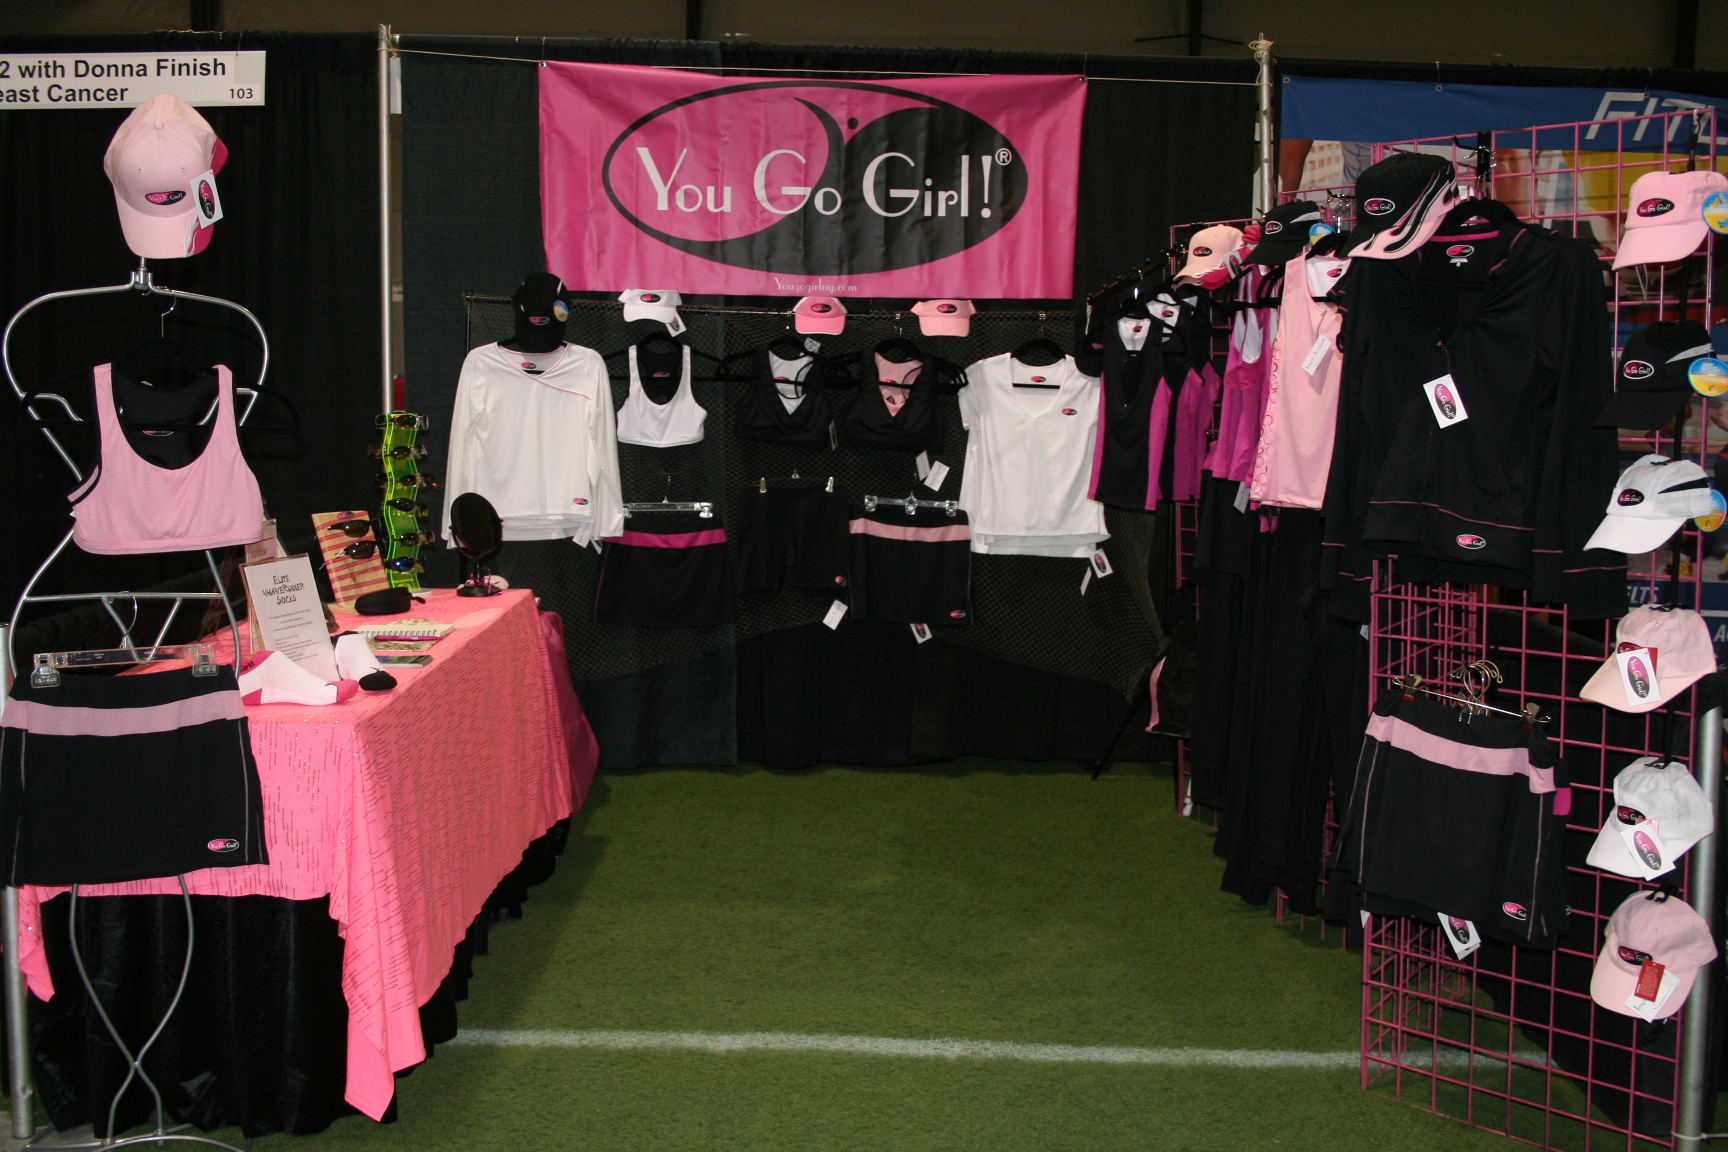 Our booth at the expo